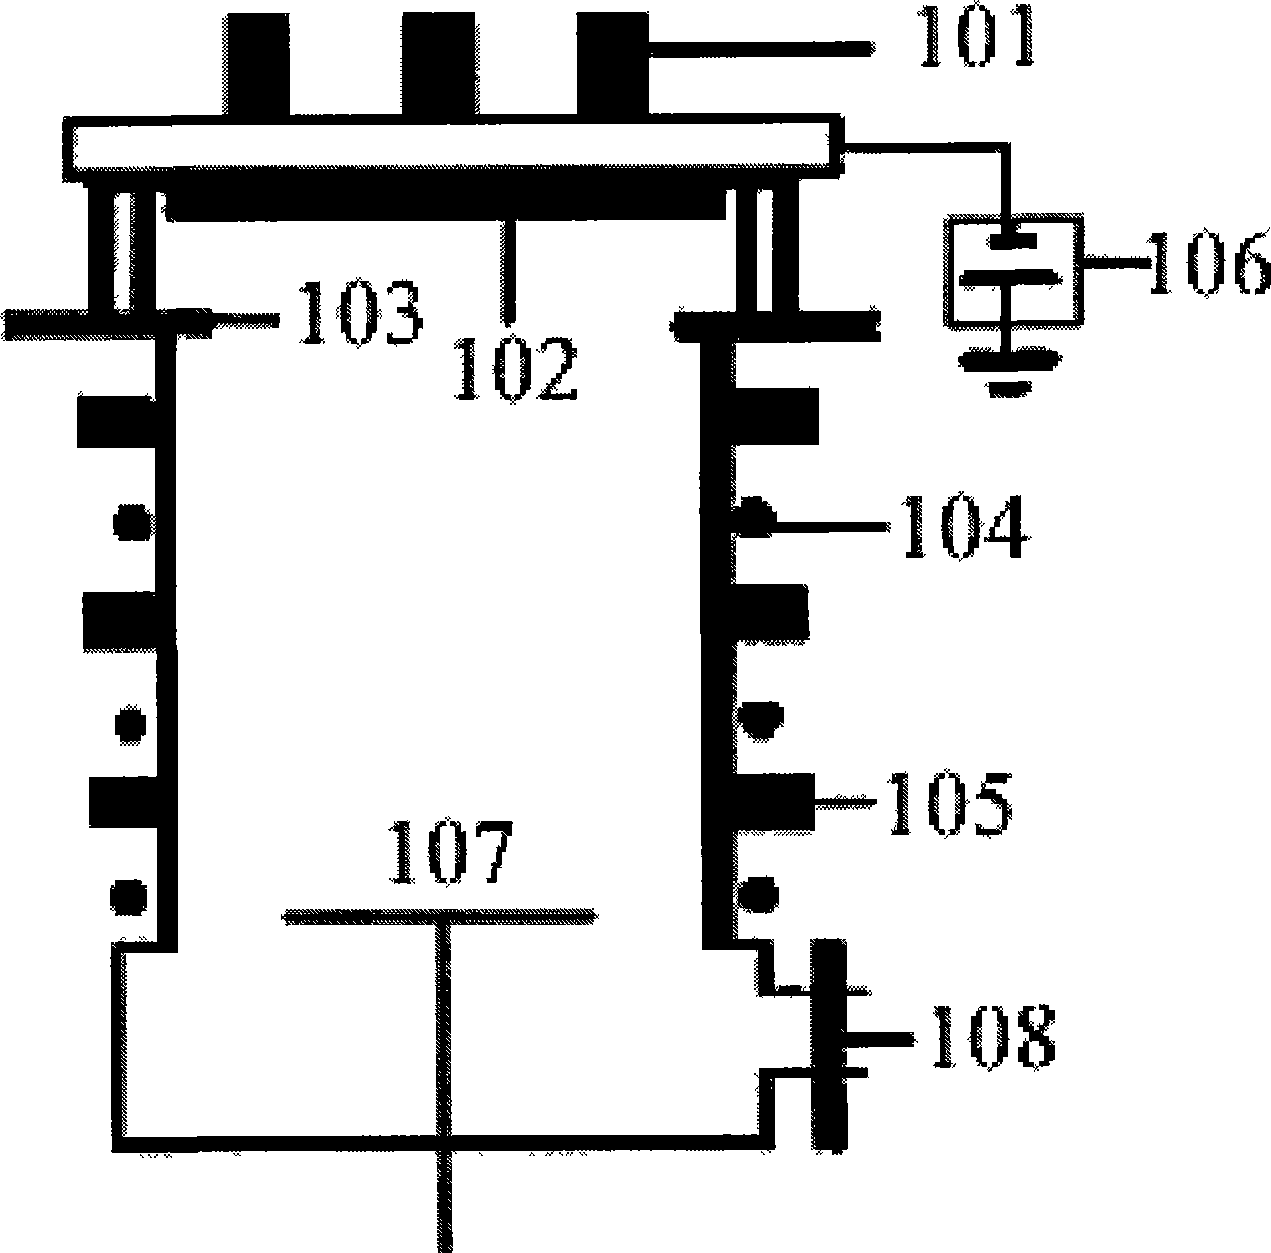 Non-balance magnetron sputtering thin film deposition apparatus for cusped magnetic field confined ICP reinforced ionization